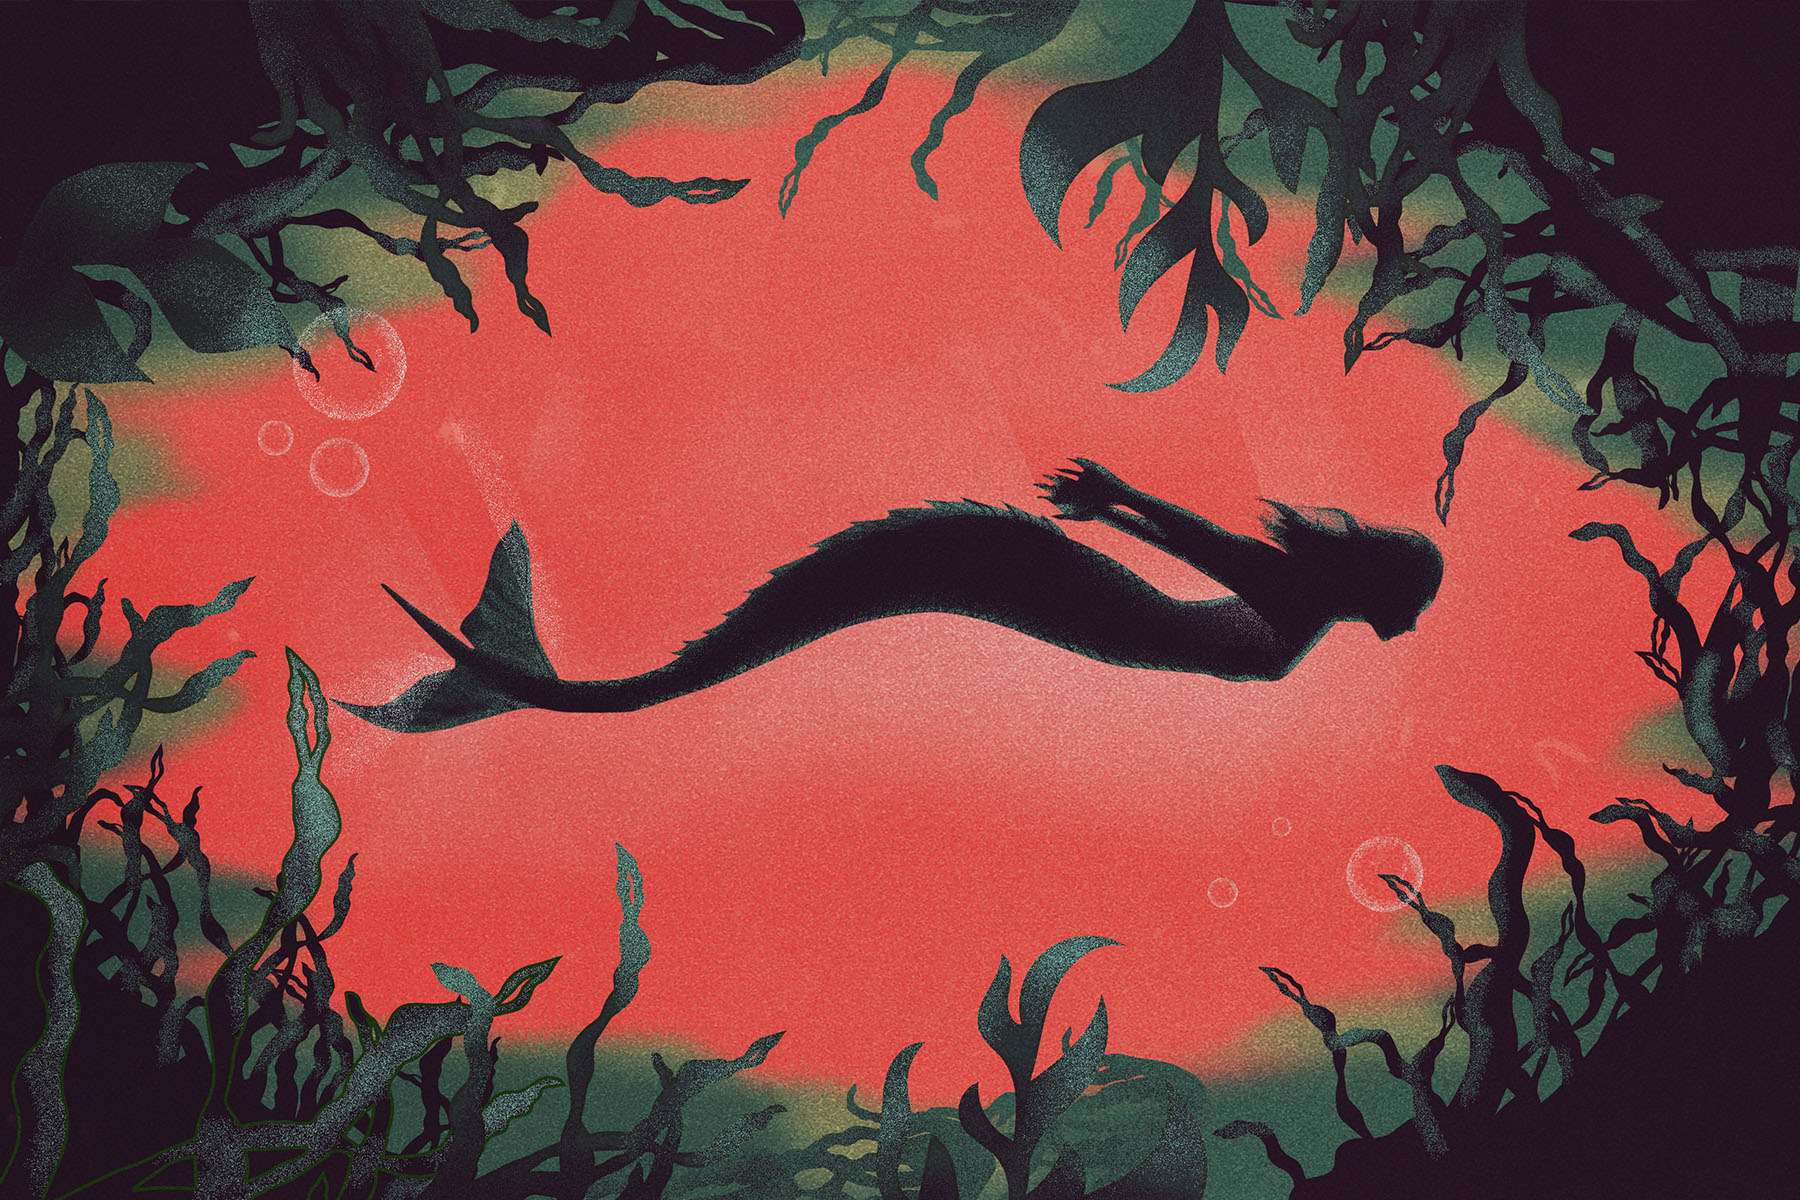 An illustration of a mermaid swimming from the side